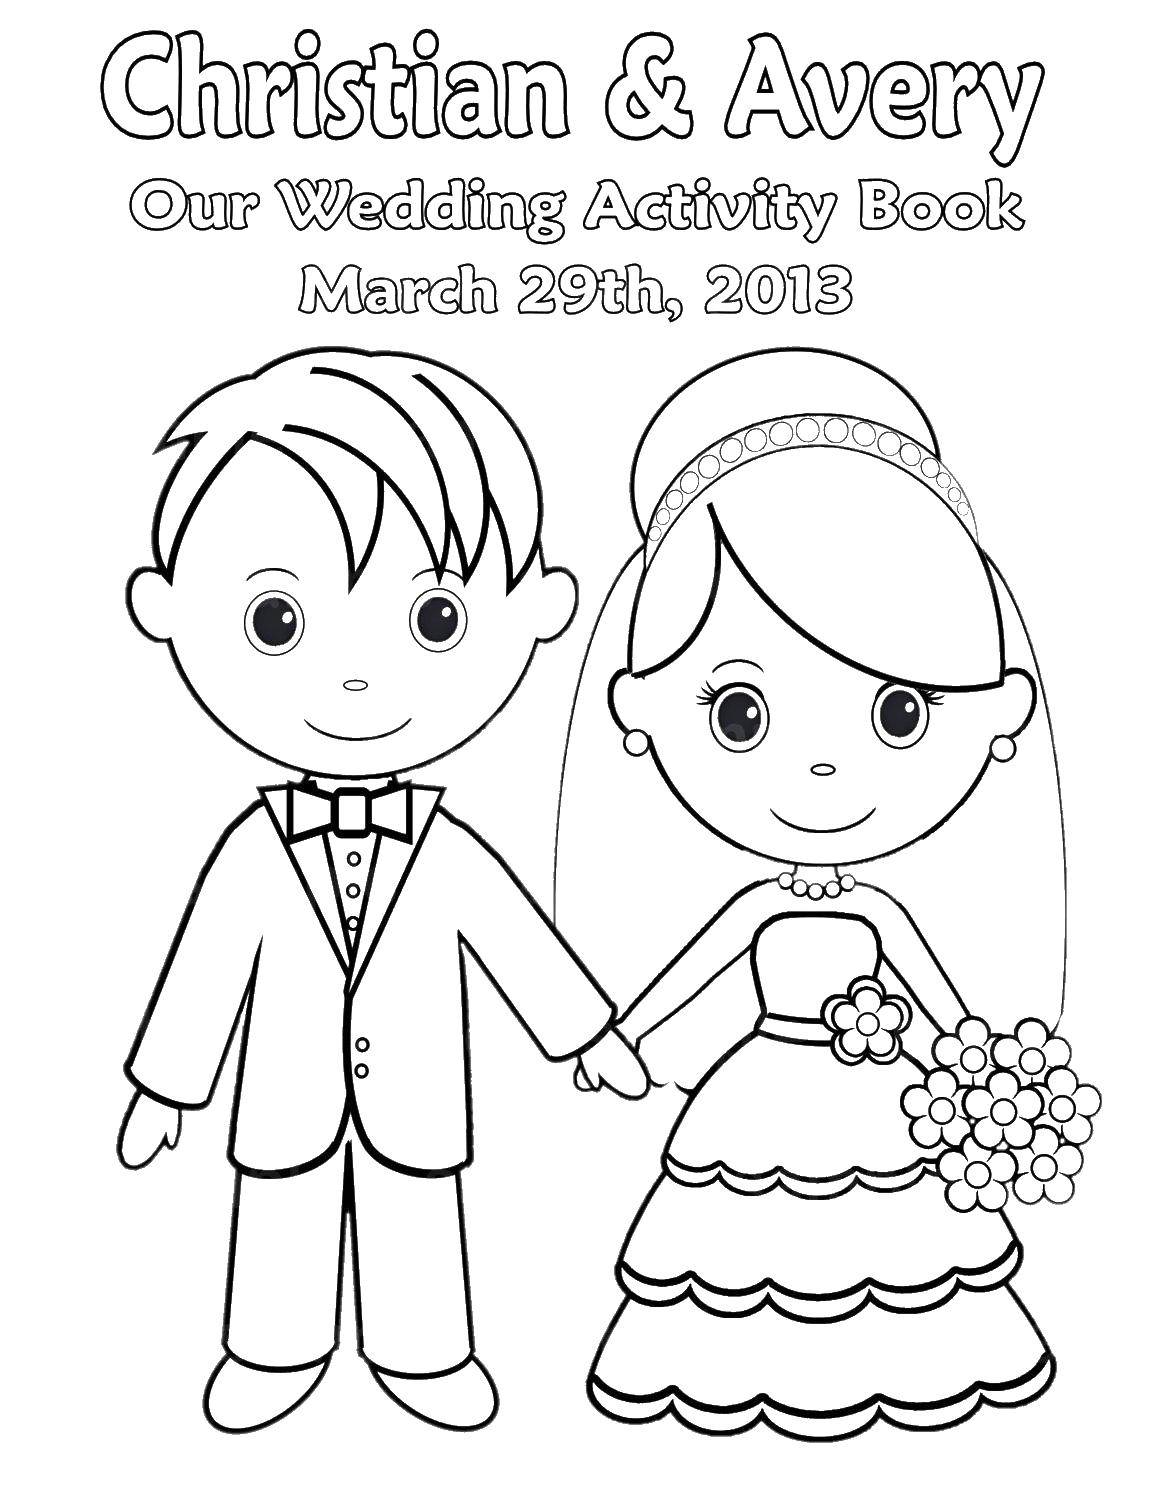 Coloring Christian groom and bride to ever. Category Wedding. Tags:  wedding dress.